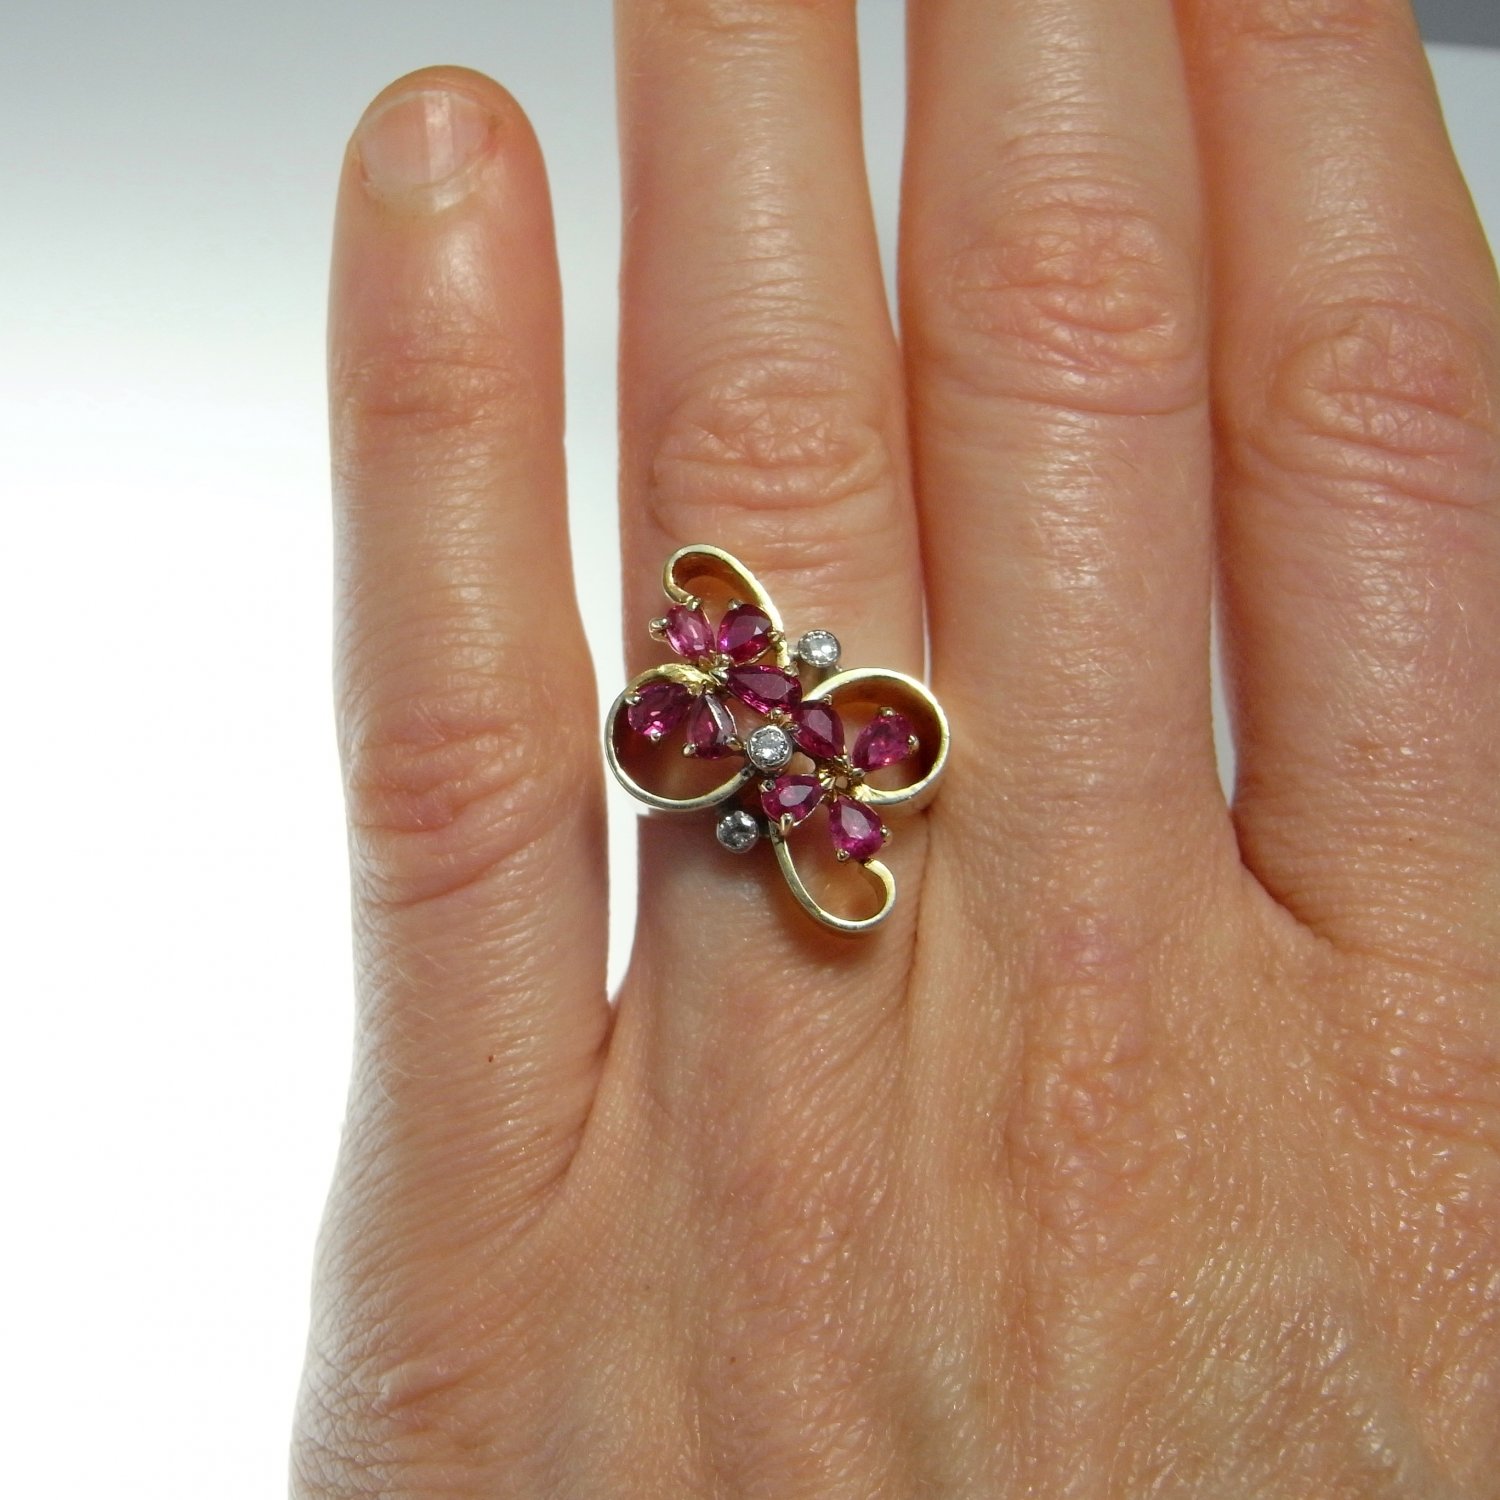 Unique 1920s Art Deco Ruby Ring 1920s Ruby Diamond Ring Art Deco Ruby Ring 14k Yellow Flower Floral Ring Ruby Daisy Ring Butterfly Ring Bow 1920s Ophir Jewels Australian Antique